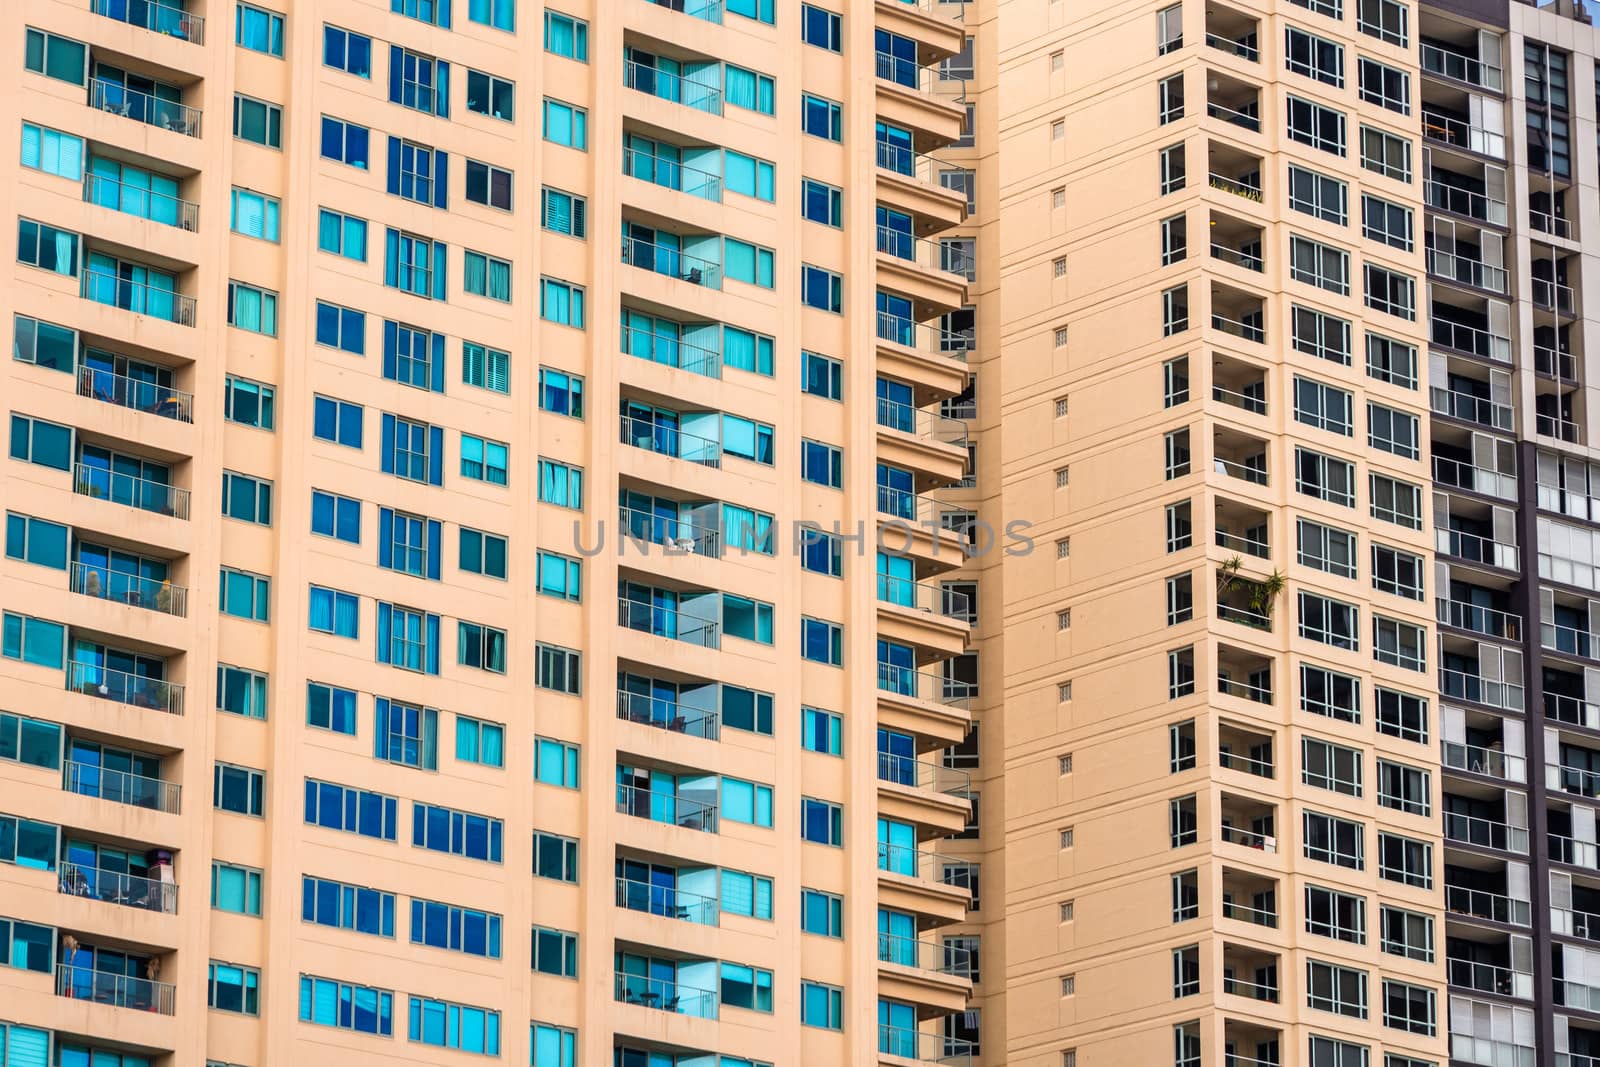 Close up view of a yellow block of flats facade packed of windows in Sydney, Australia